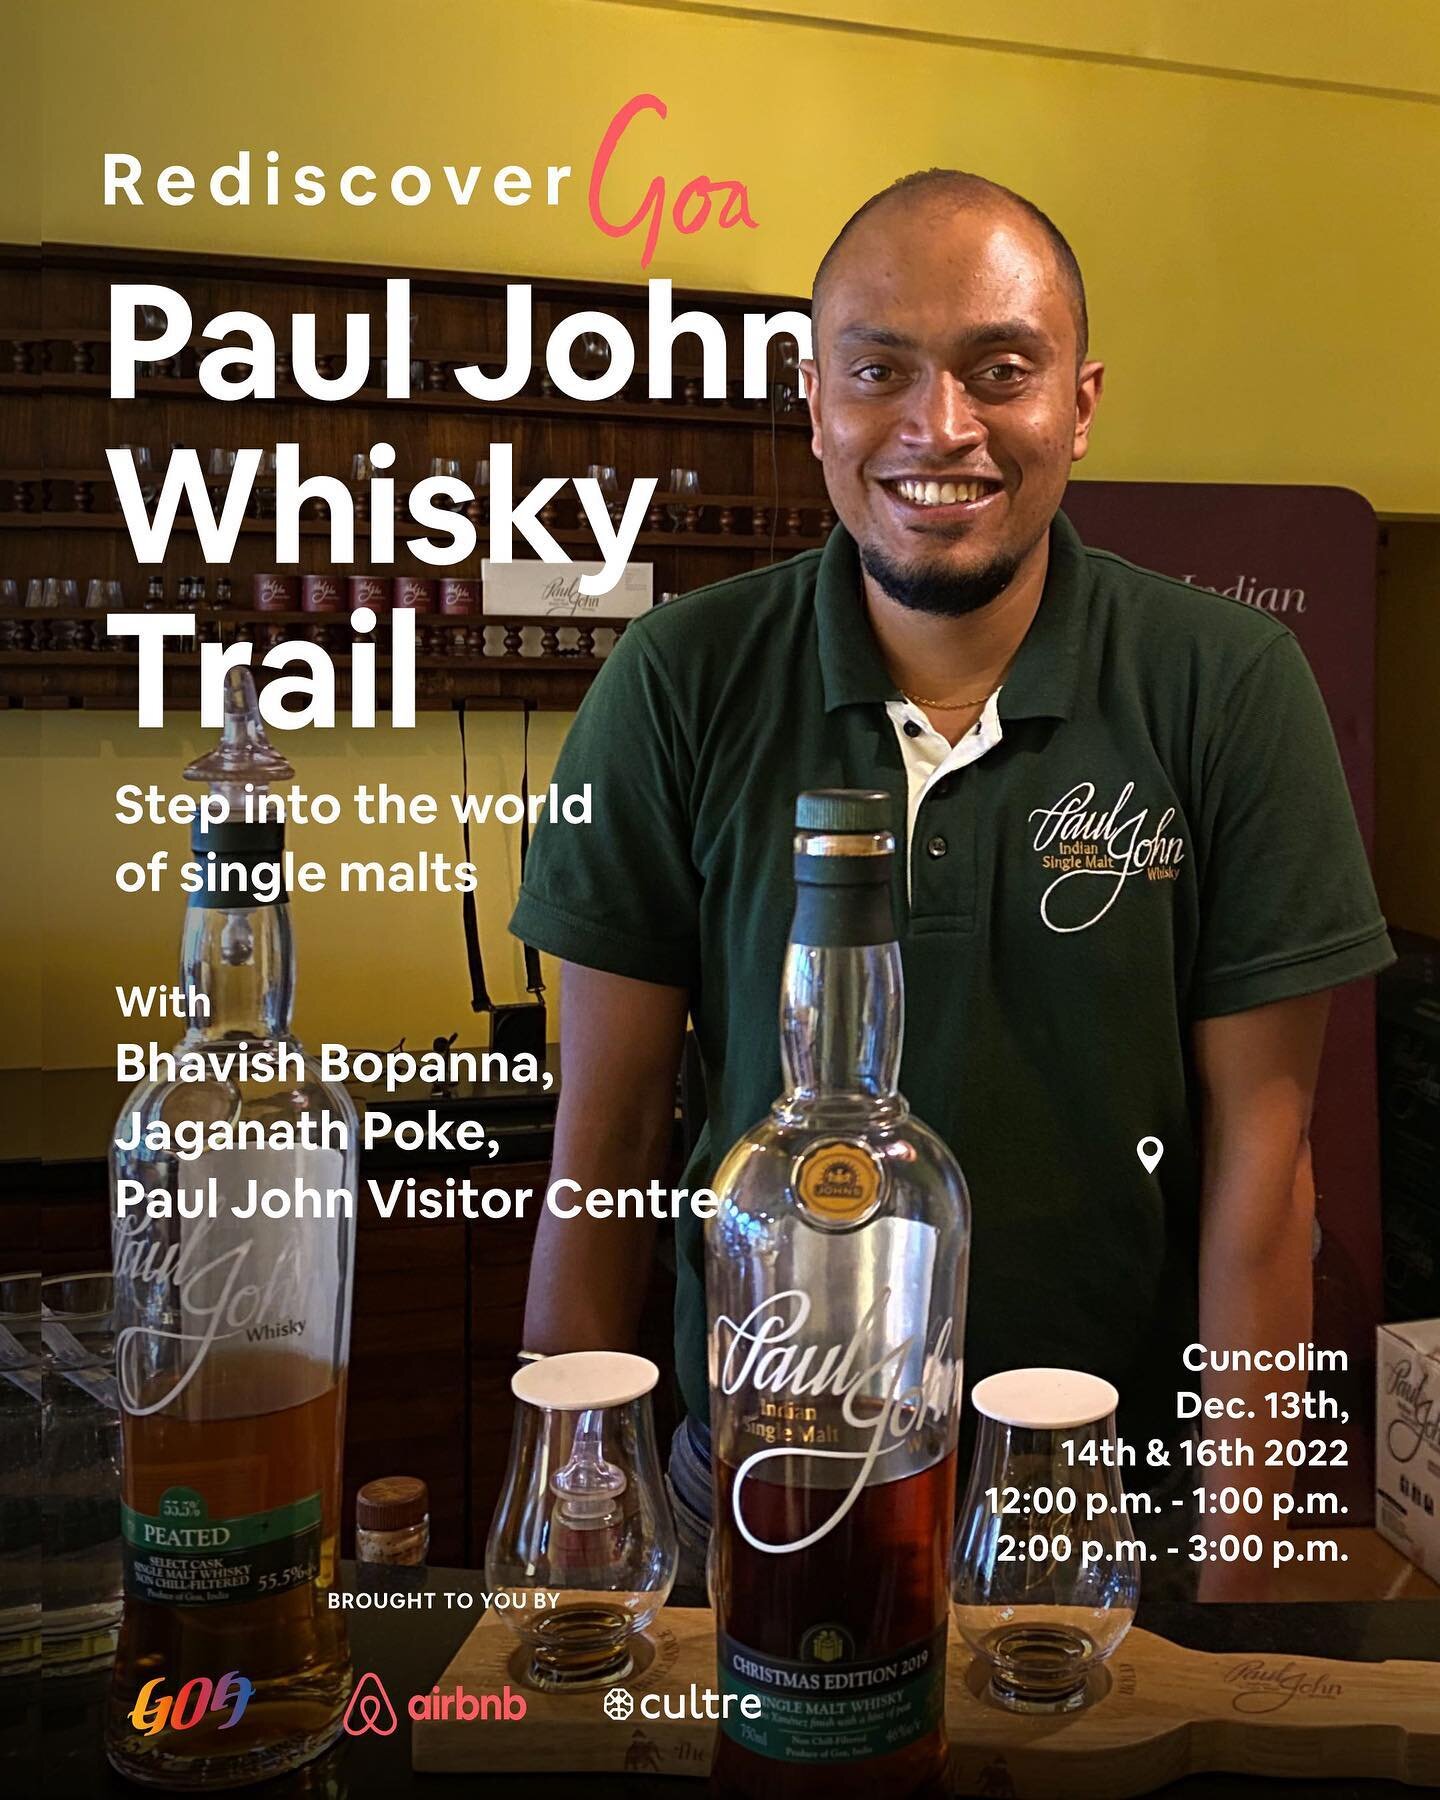 Join the hosts as they take you on a tour to the Paul John Visitor Centre and spill secrets of this Goa-based Indian single malt whisky has taken all whisky lovers by a storm. Limited spots available
Book now. Link in Bio

#RediscoverGoa 
@goatourism